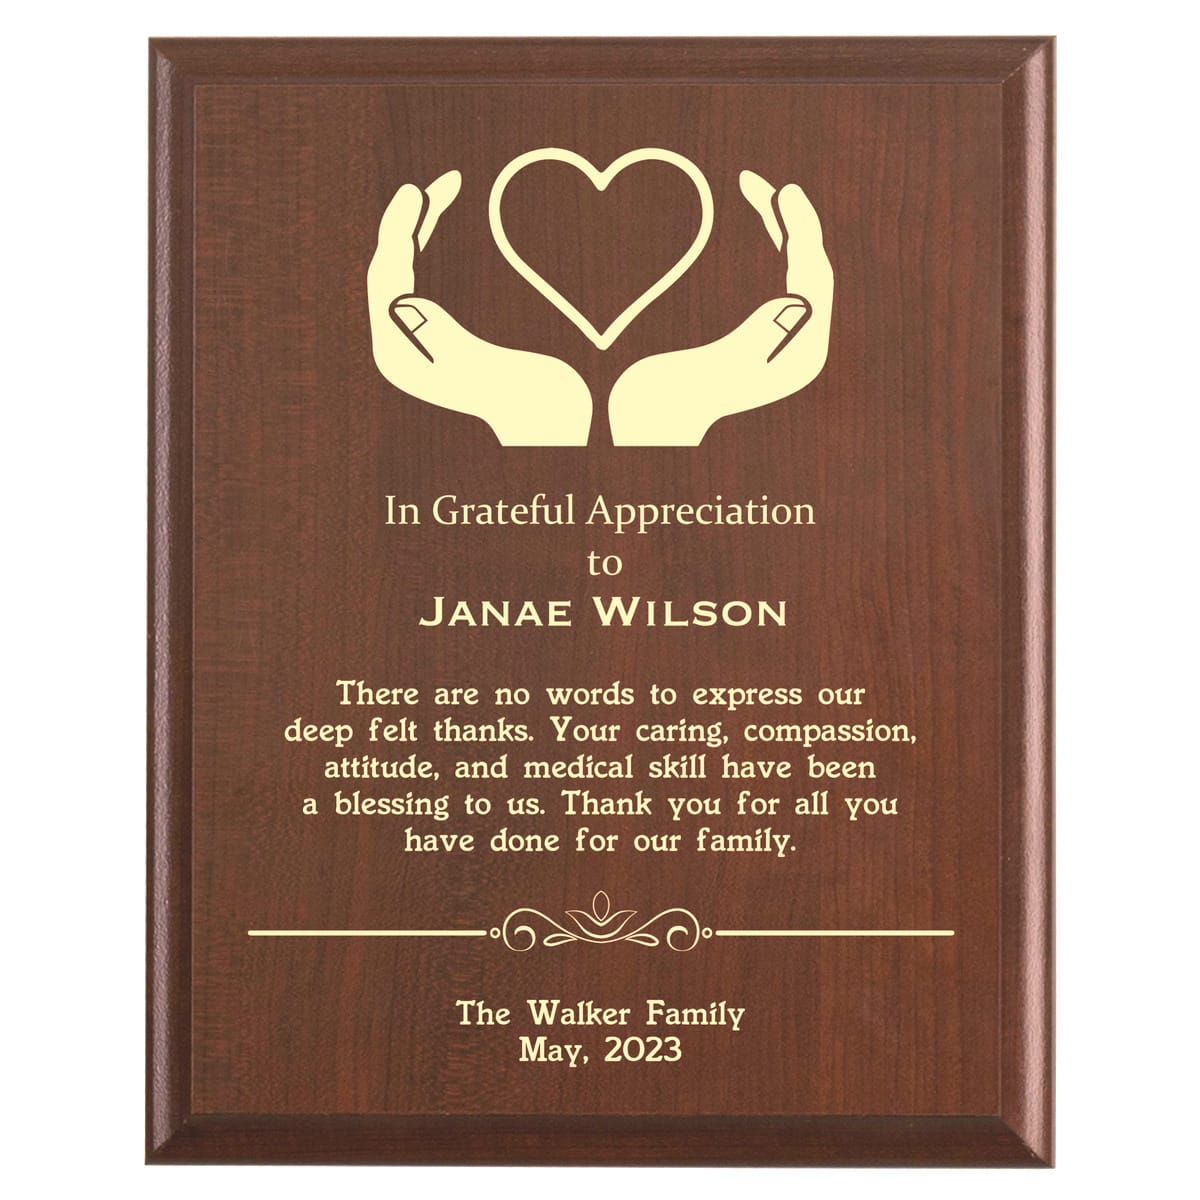 Plaque photo: Family Caregiver Thank You Gift design with free personalization. Wood style finish with customized text.